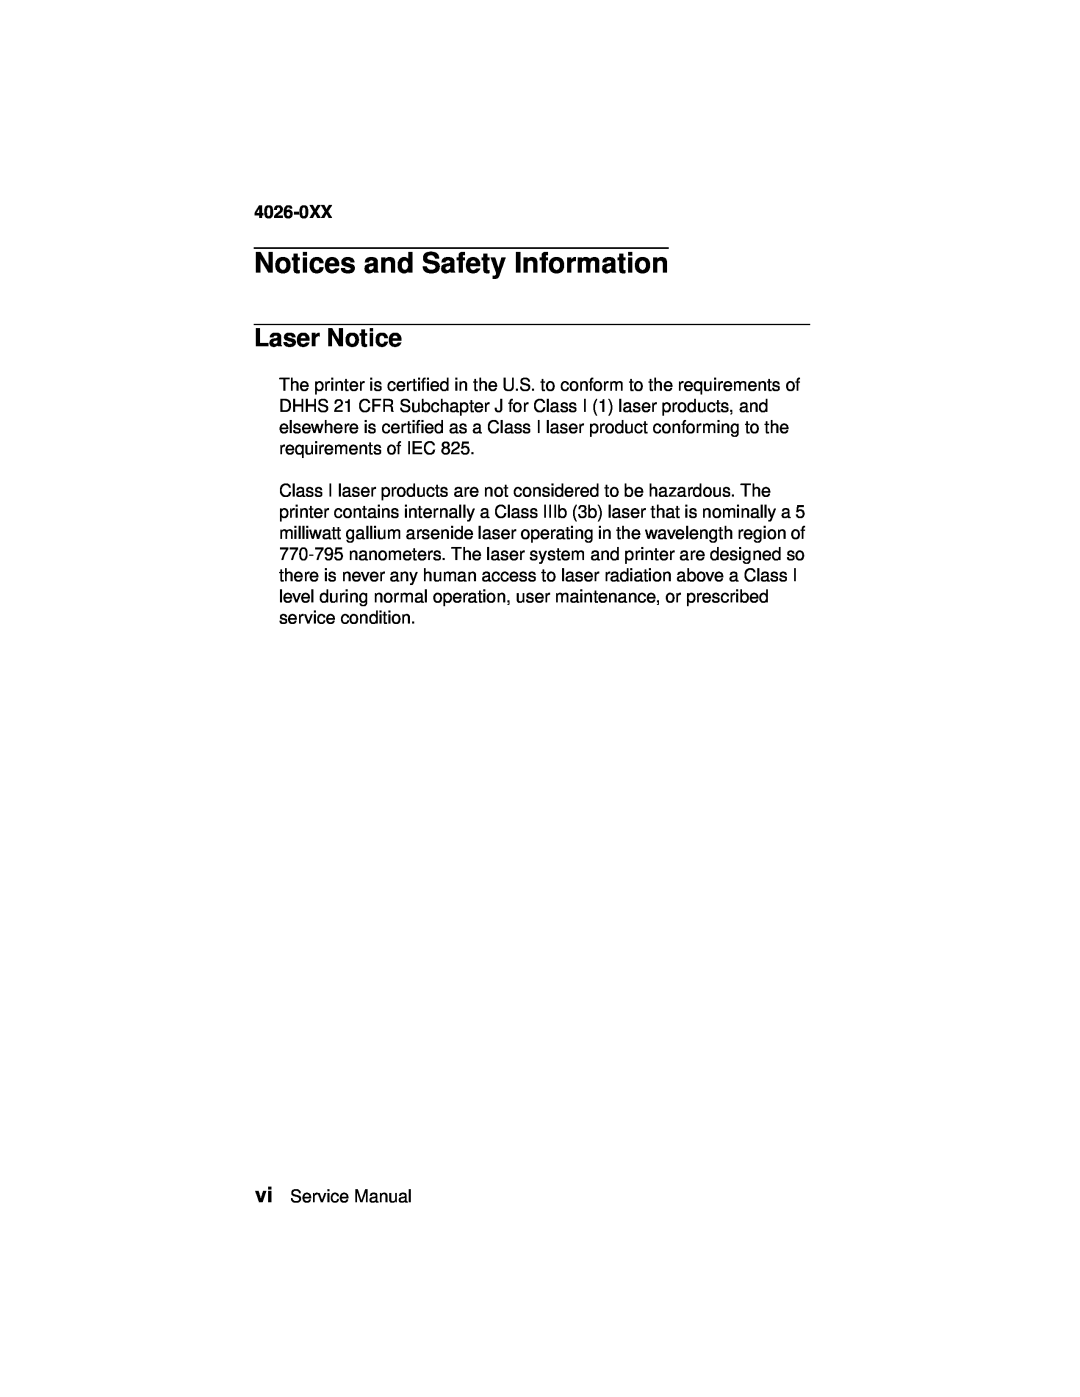 Lexmark OptraTM manual Notices and Safety Information, Laser Notice, 4026-0XX 